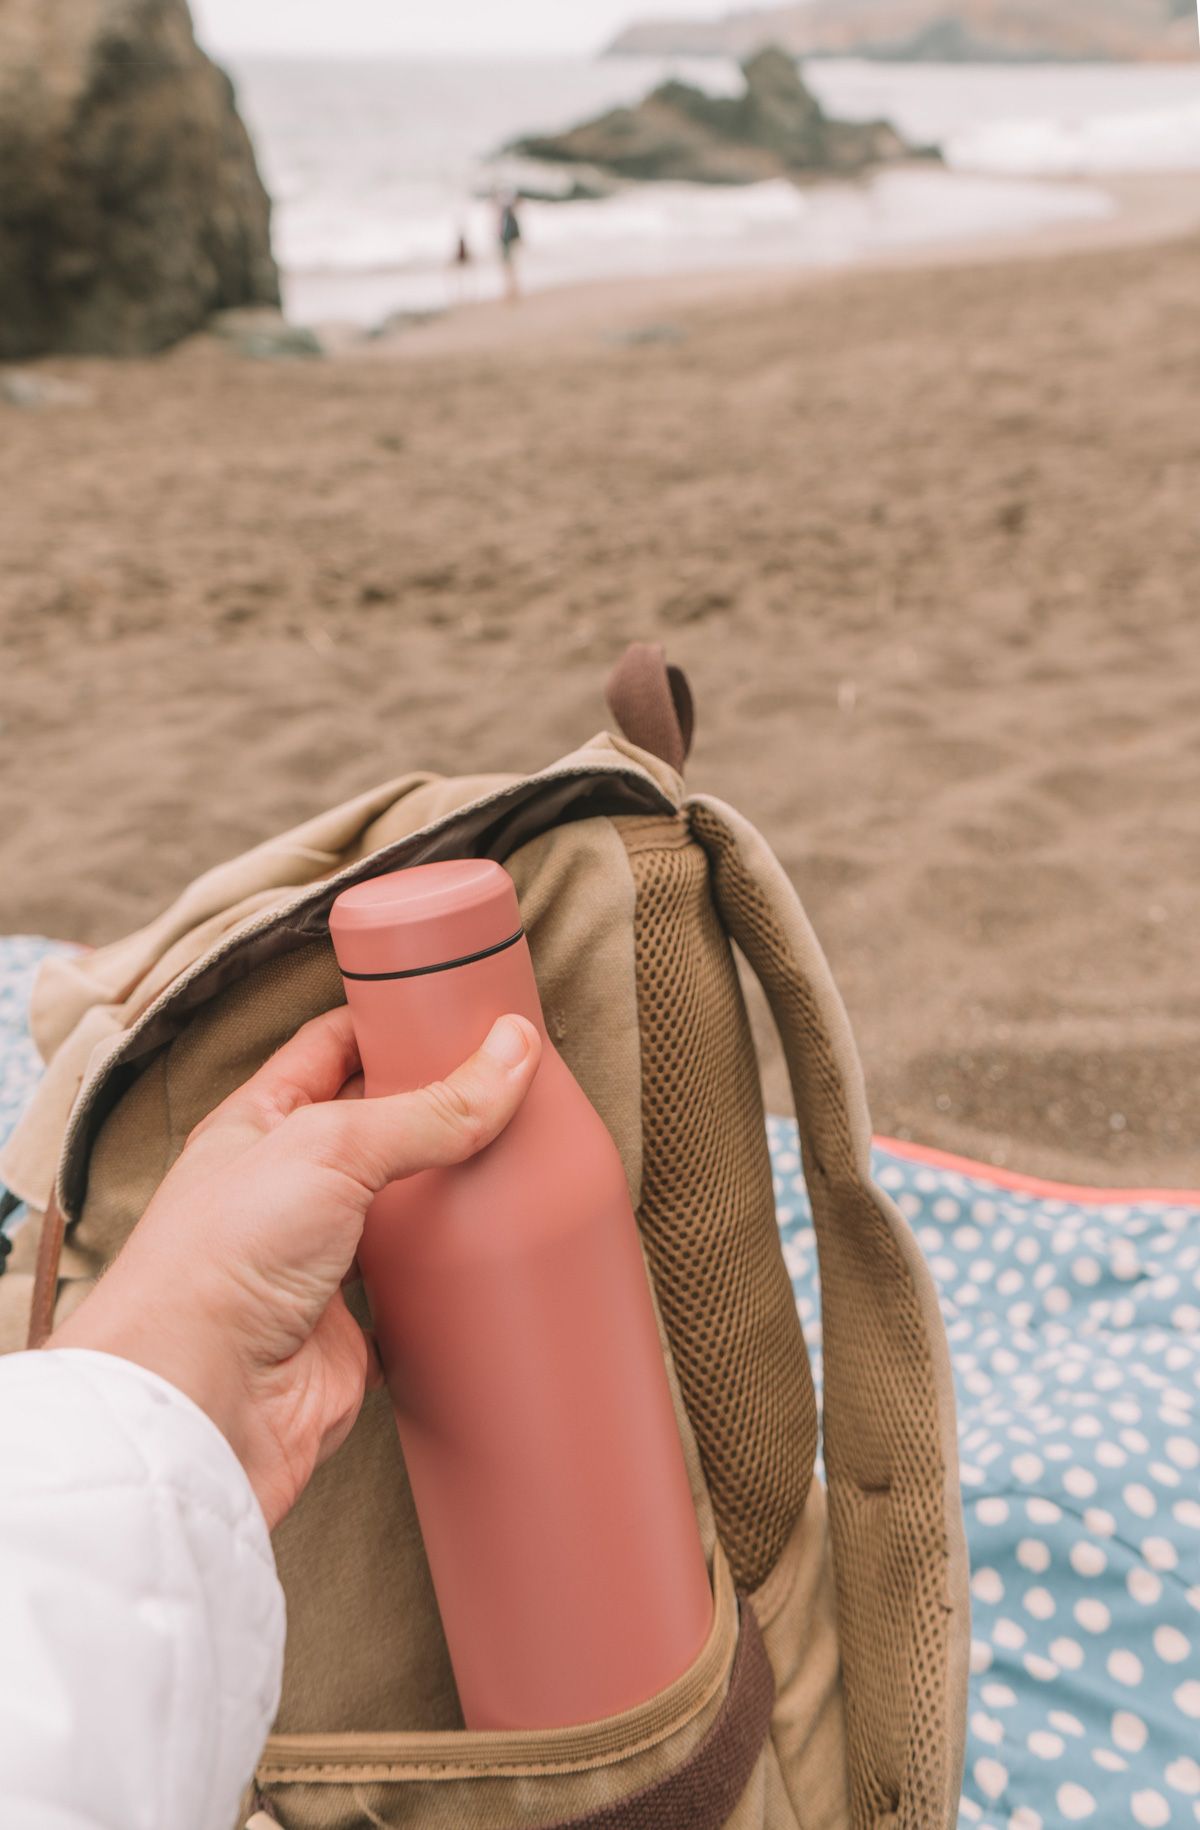 A hand holds a pink water bottle against a light brown backpack with an overcast beach in soft-focus in the background.